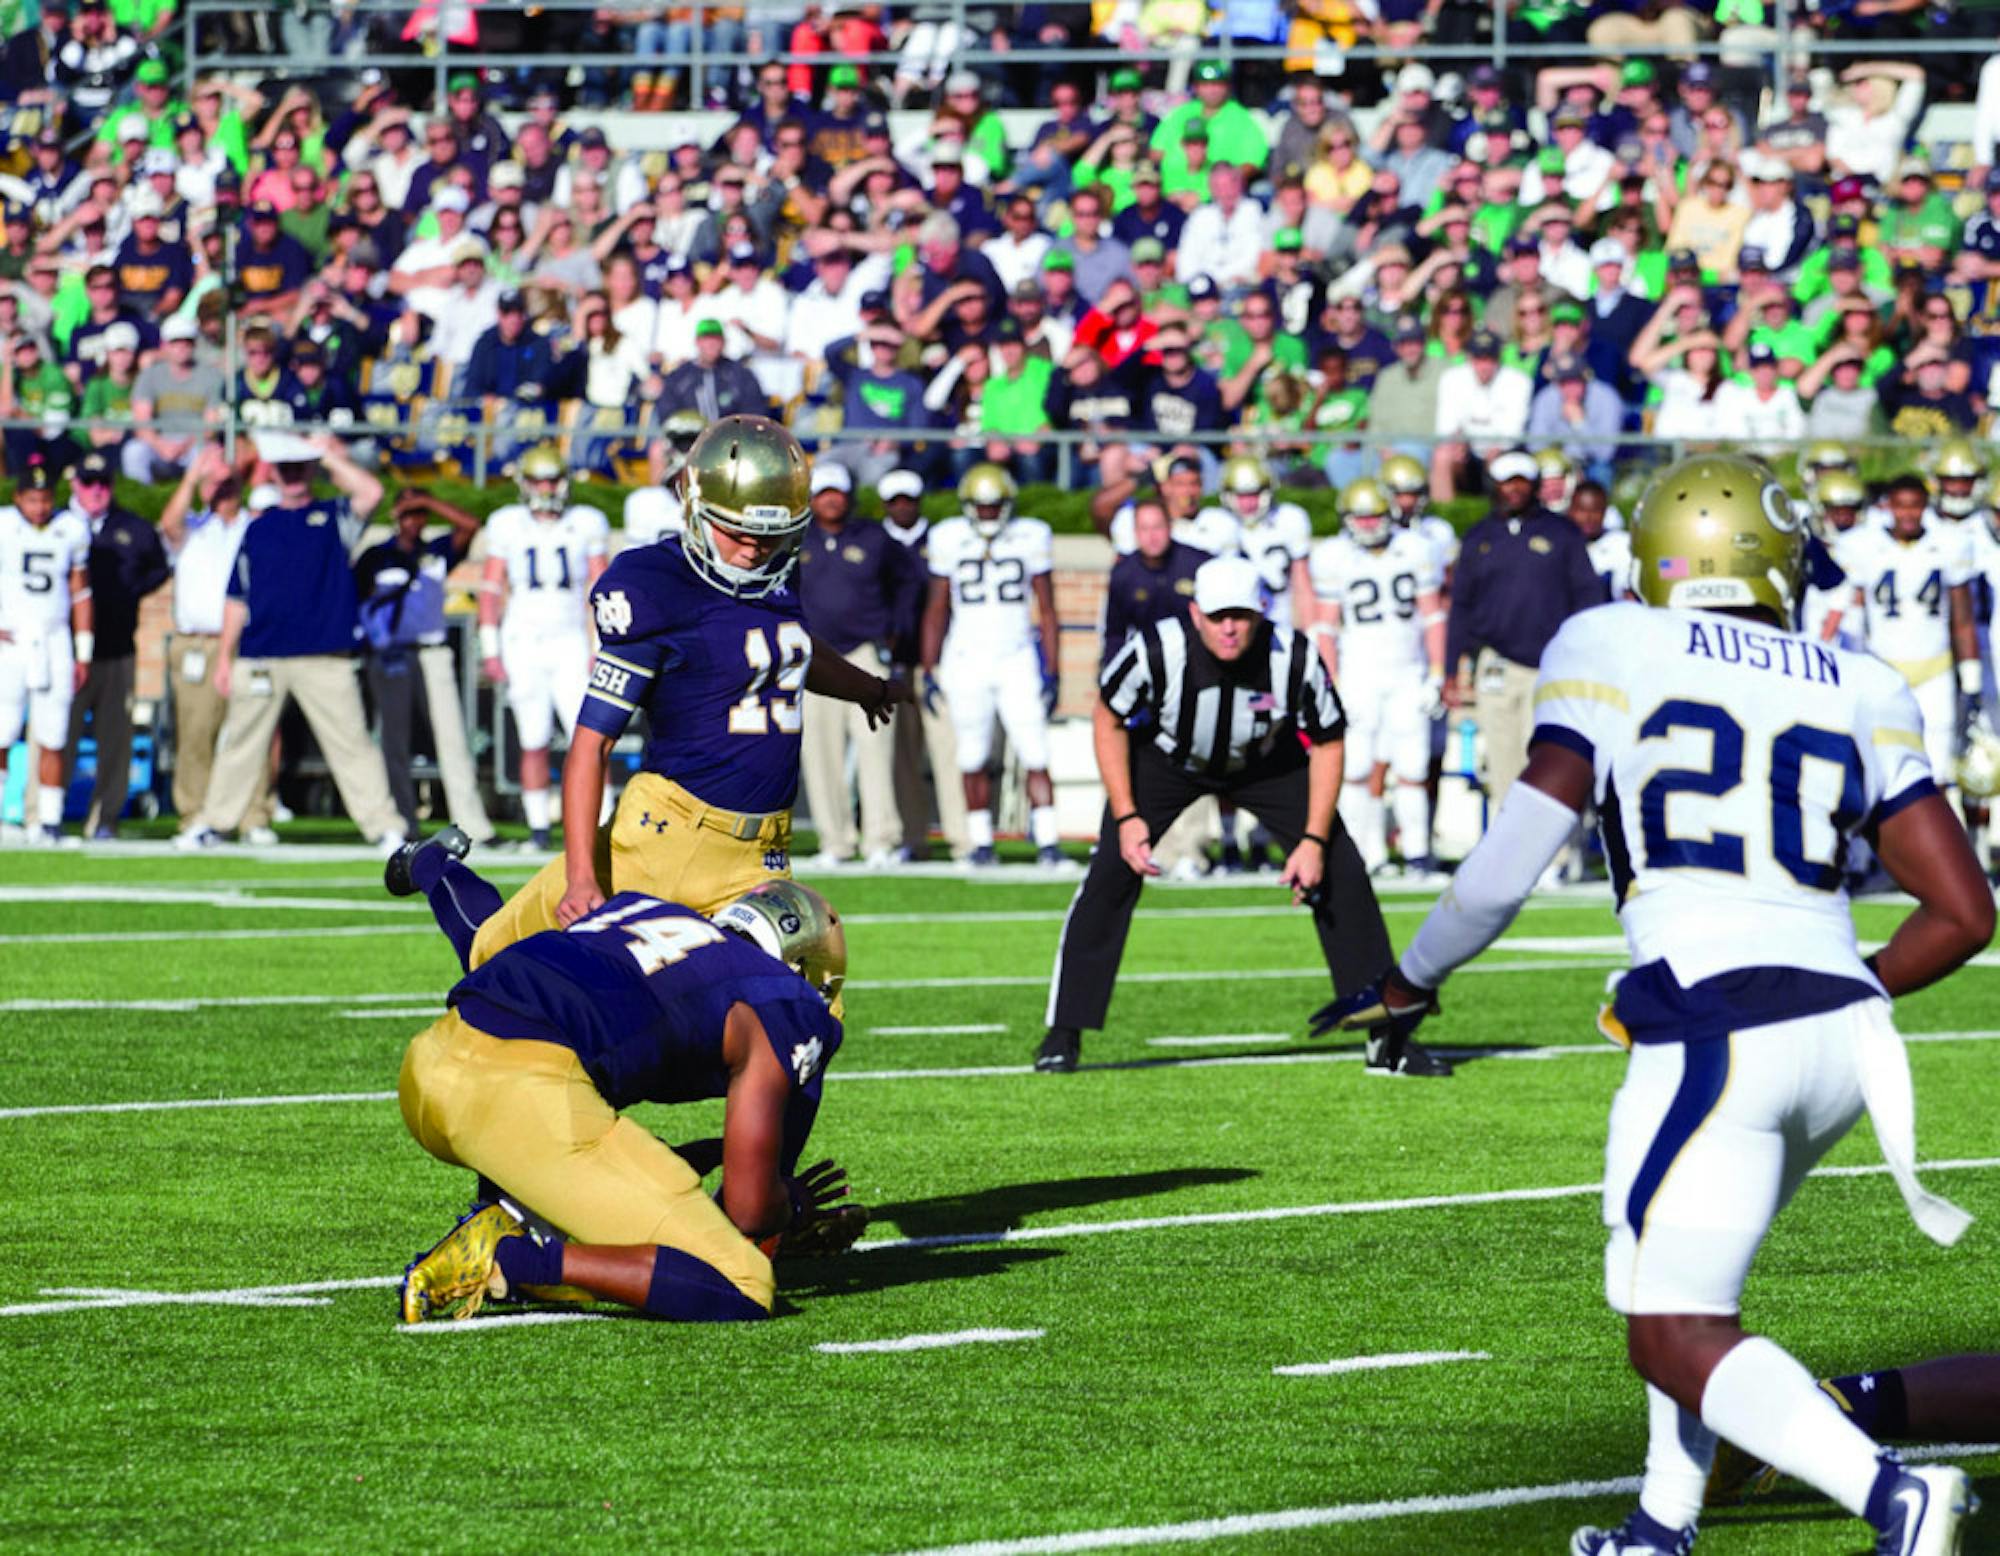 Irish freshman kicker Justin Yoon winds up for a field goal attempt during Notre Dame’s 30-22 win over Georgia Tech. Yoon is 4 for 6 on field goals this year but missed an extra point Saturday.